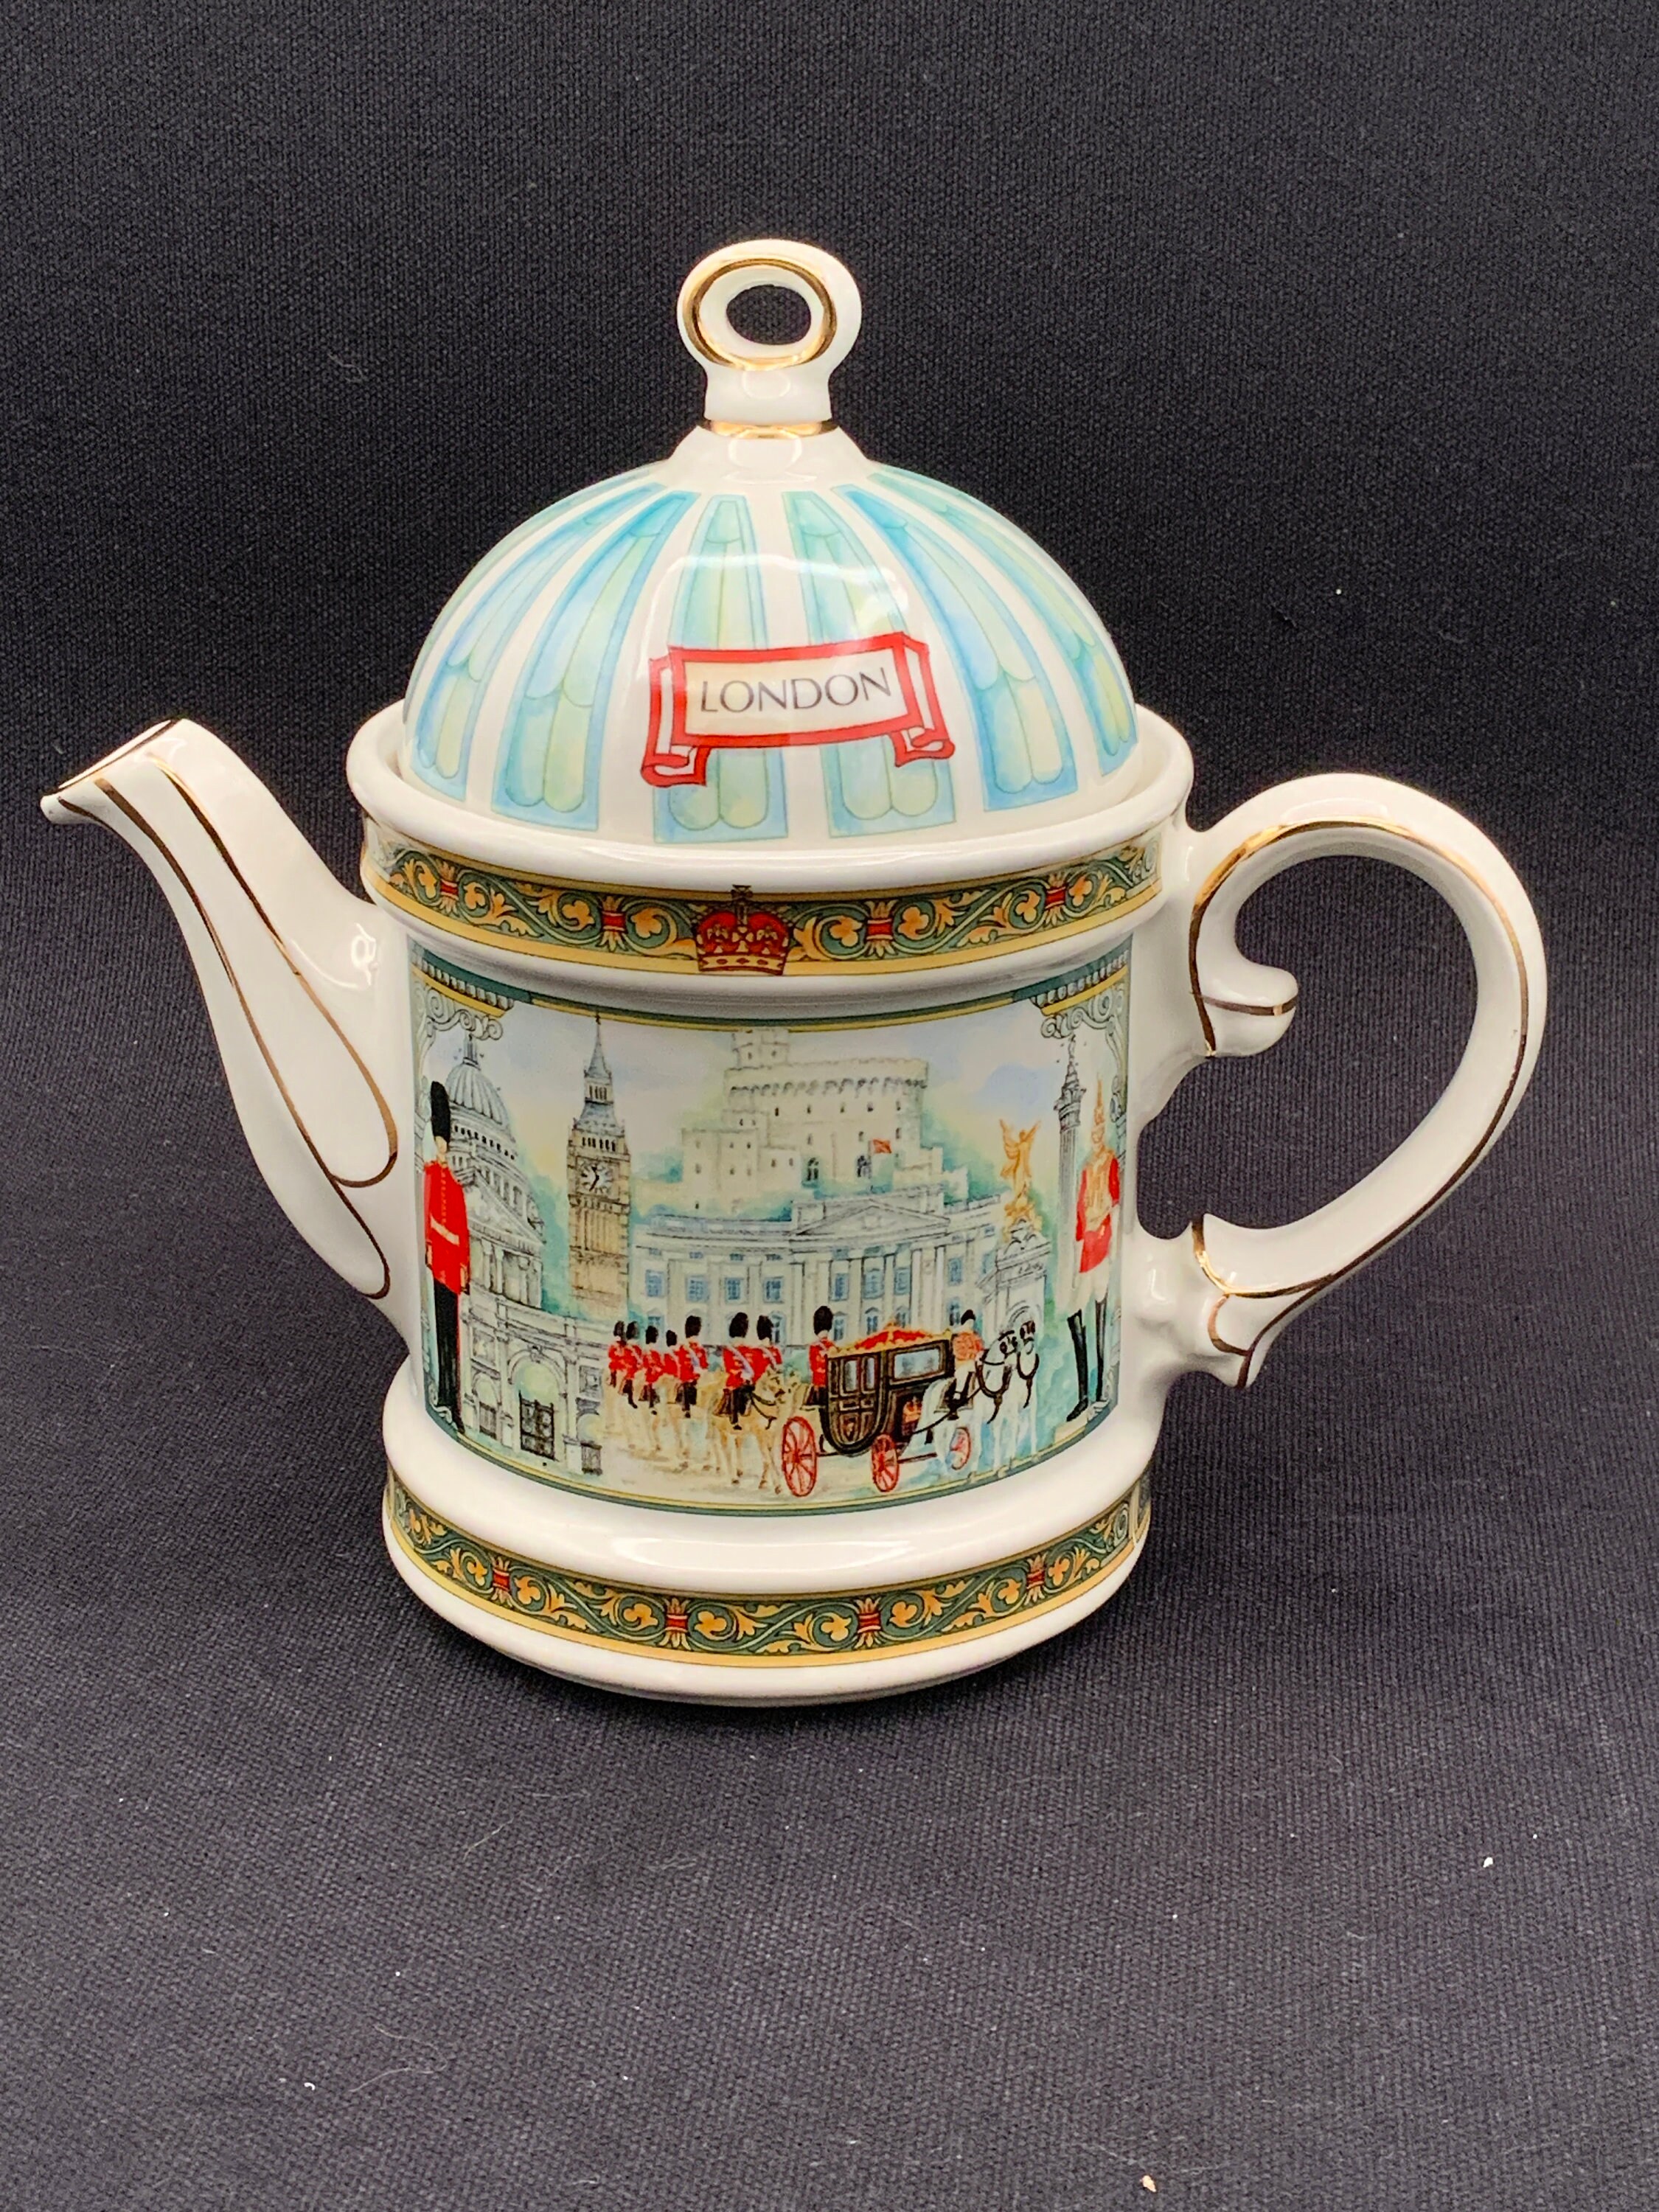 Kaffe Fassett Teapots Teapot Design for London Pottery by David Birch  Decorative Designs Are by Kaffe Fassett New in Box With Hangtag 